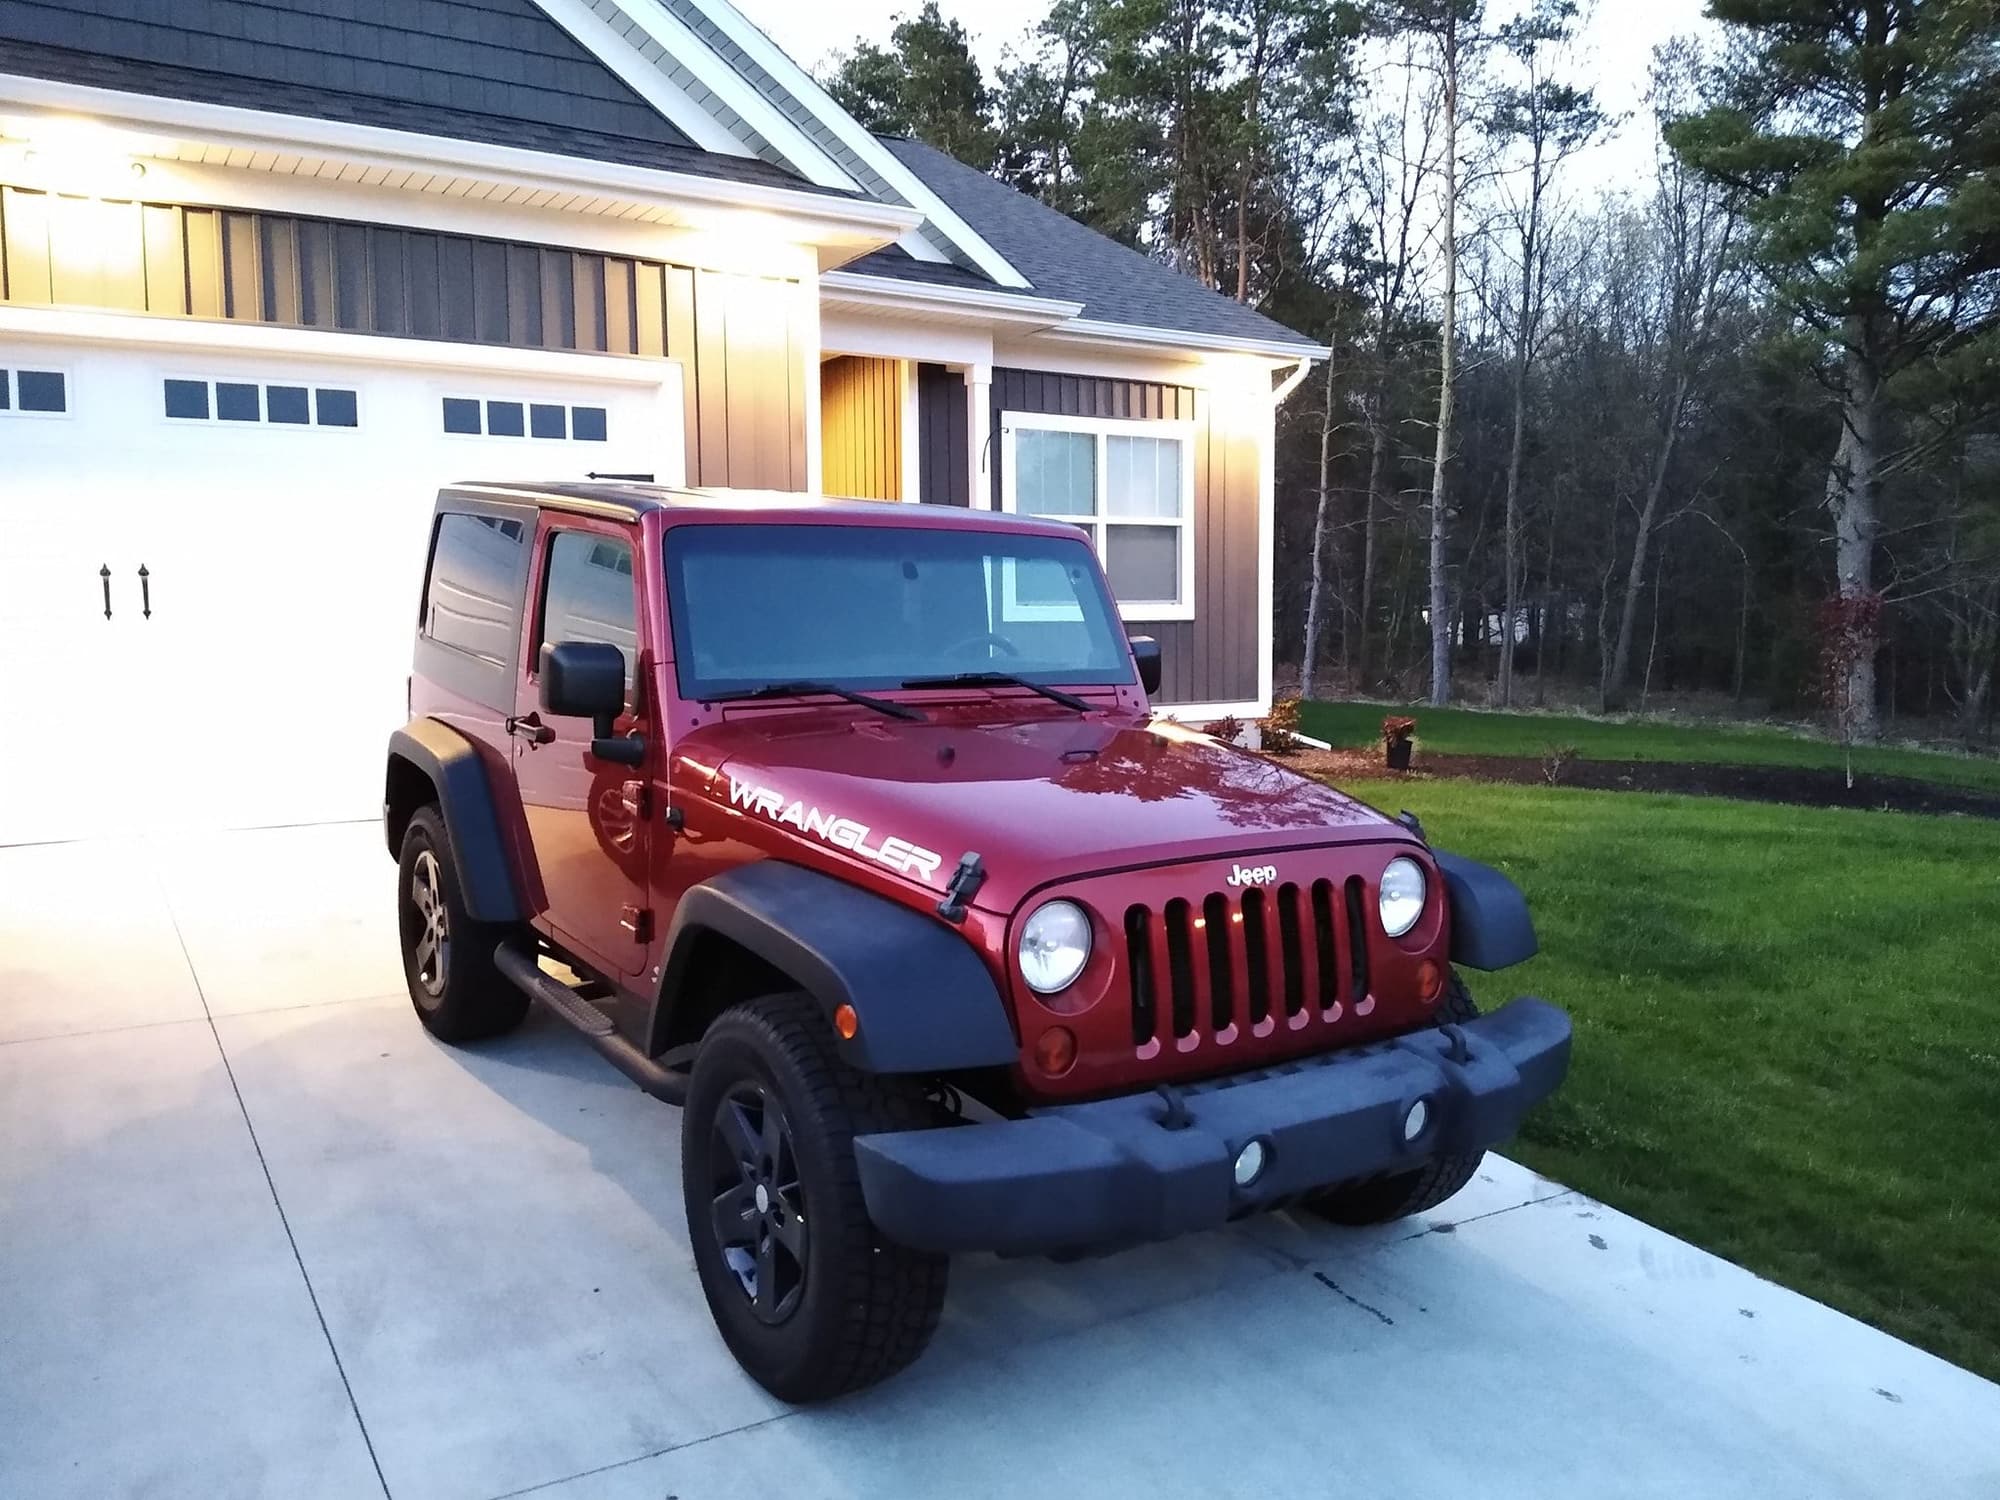 Exterior Body Parts - Wanted deep cherry red color matched OEM fender flares. - New or Used - 2012 Jeep Wrangler - Whitehall, MI 49461, United States